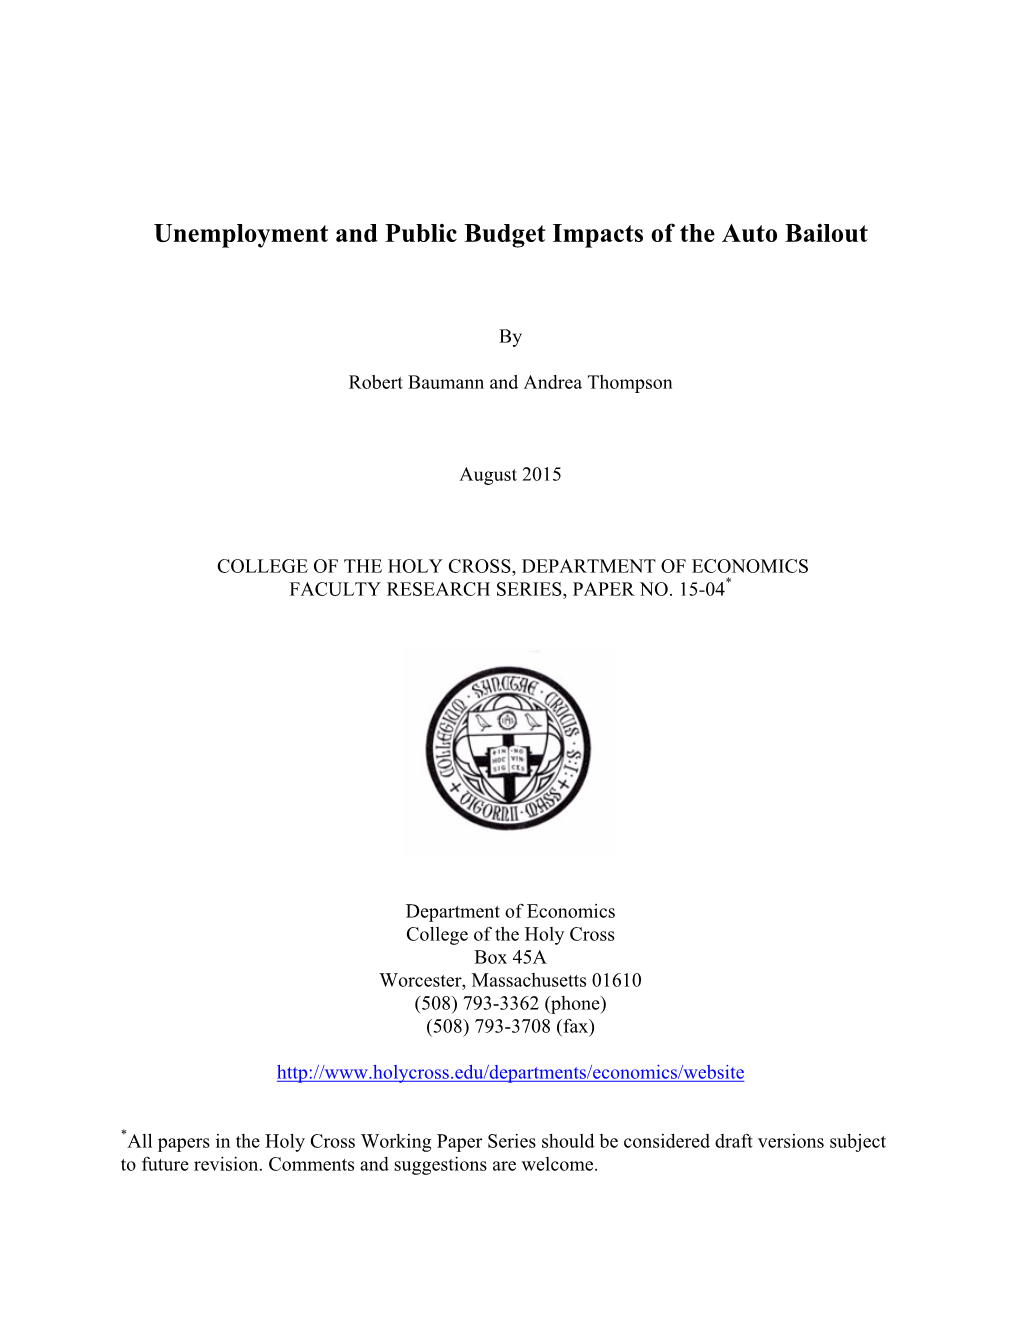 Unemployment and Public Budget Impacts of the Auto Bailout